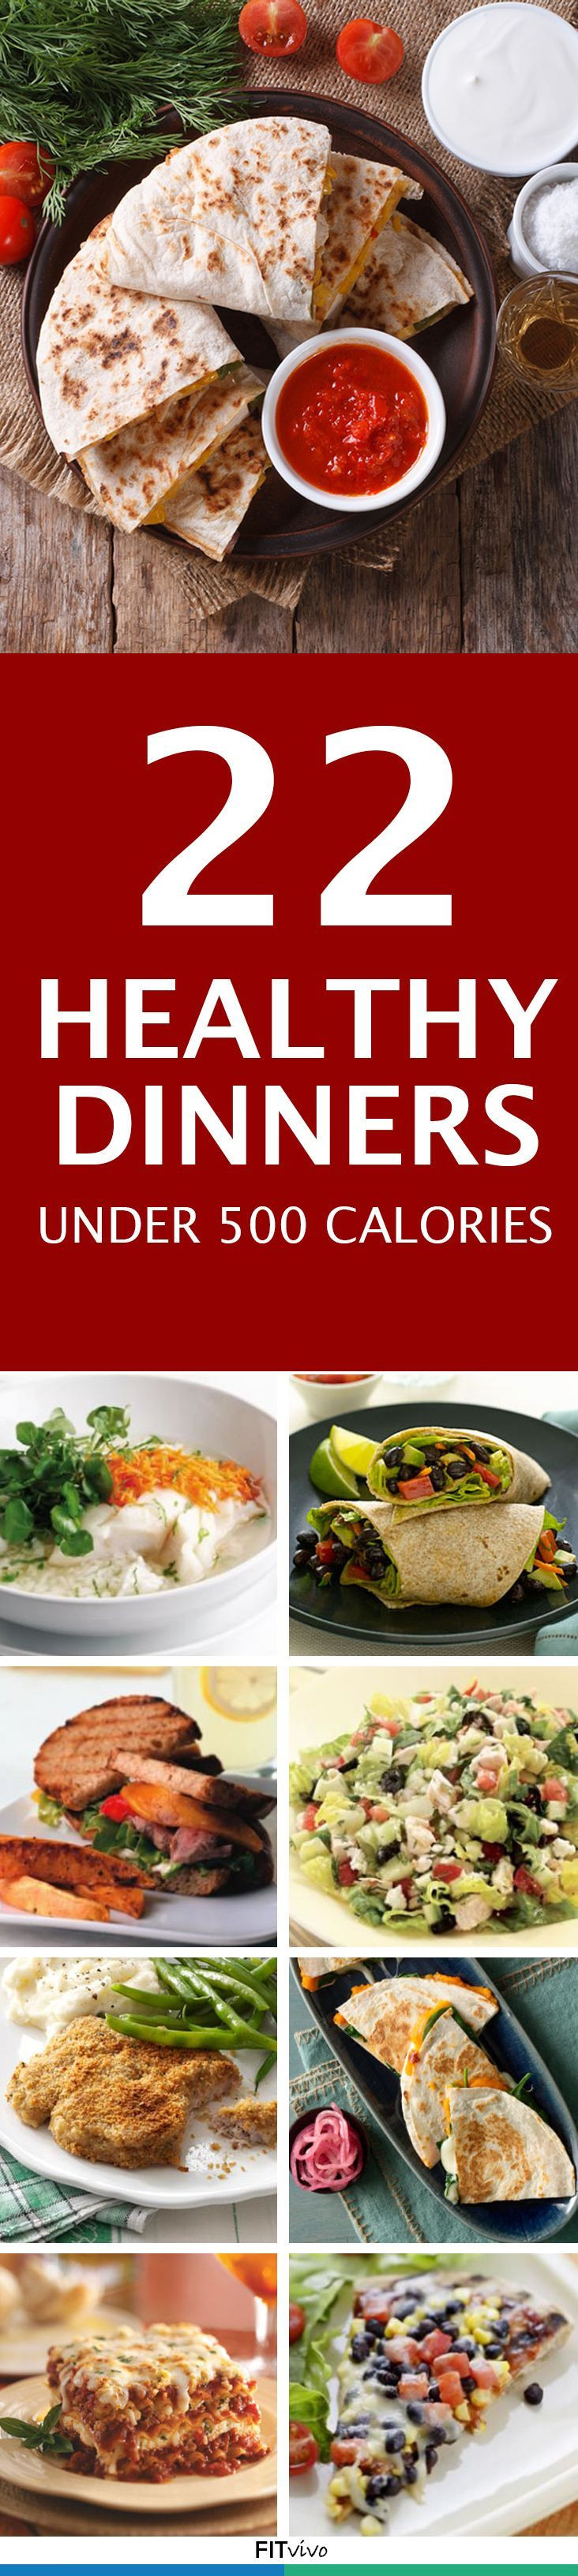 Healthy Recipes For Weight Loss On A Budget
 Healthy Dinner Recipes 22 Meal Recipes Under 500